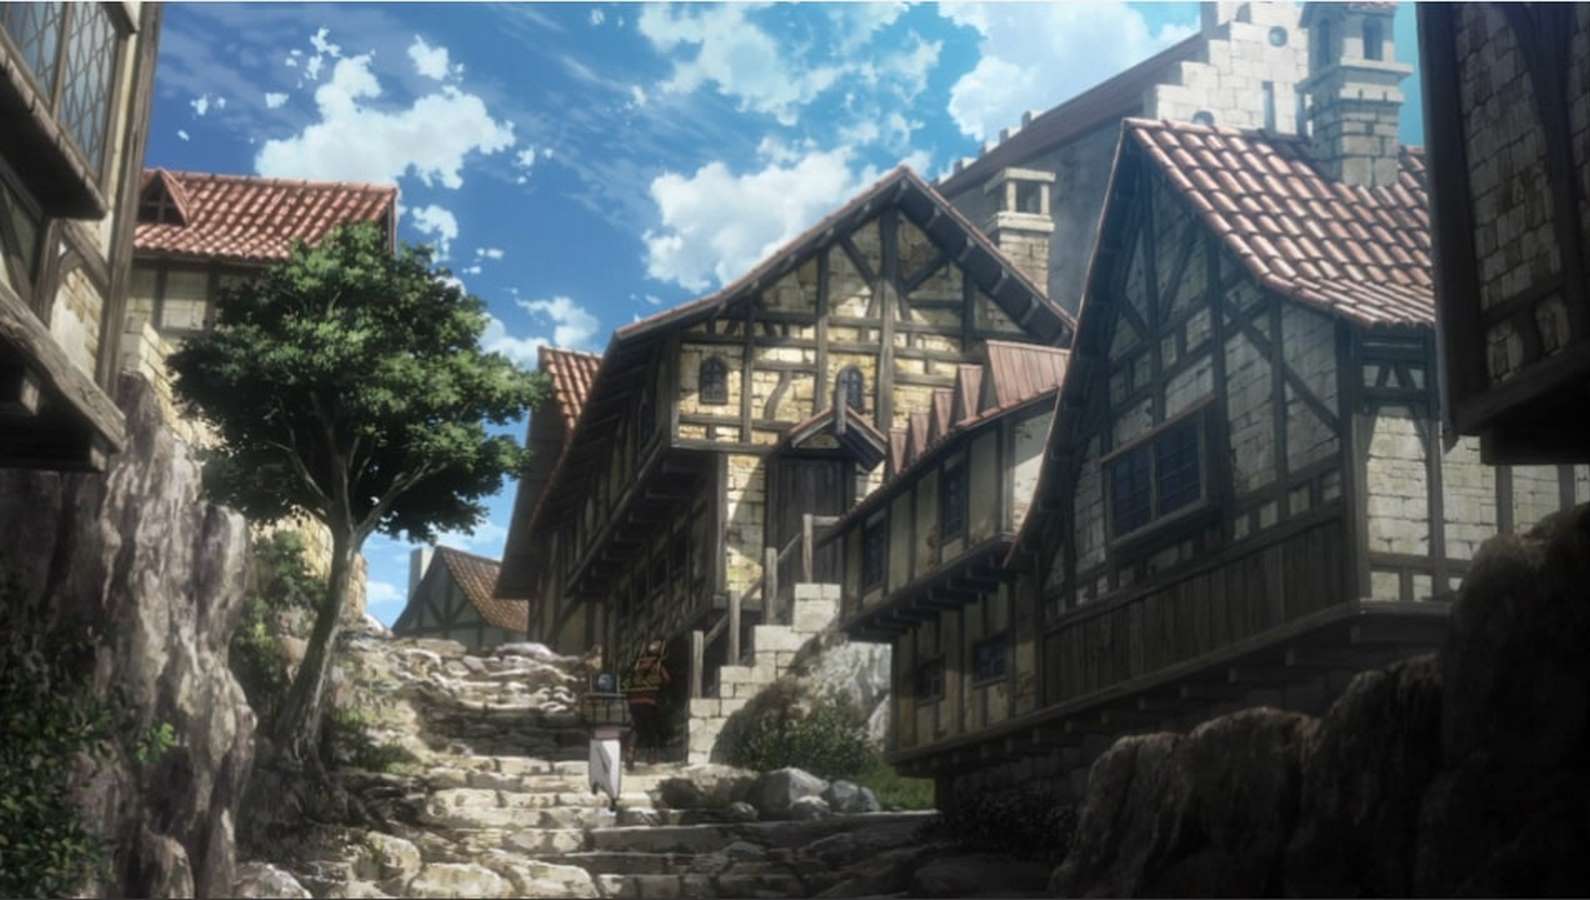 An architectural review of Attack on Titan - Sheet5